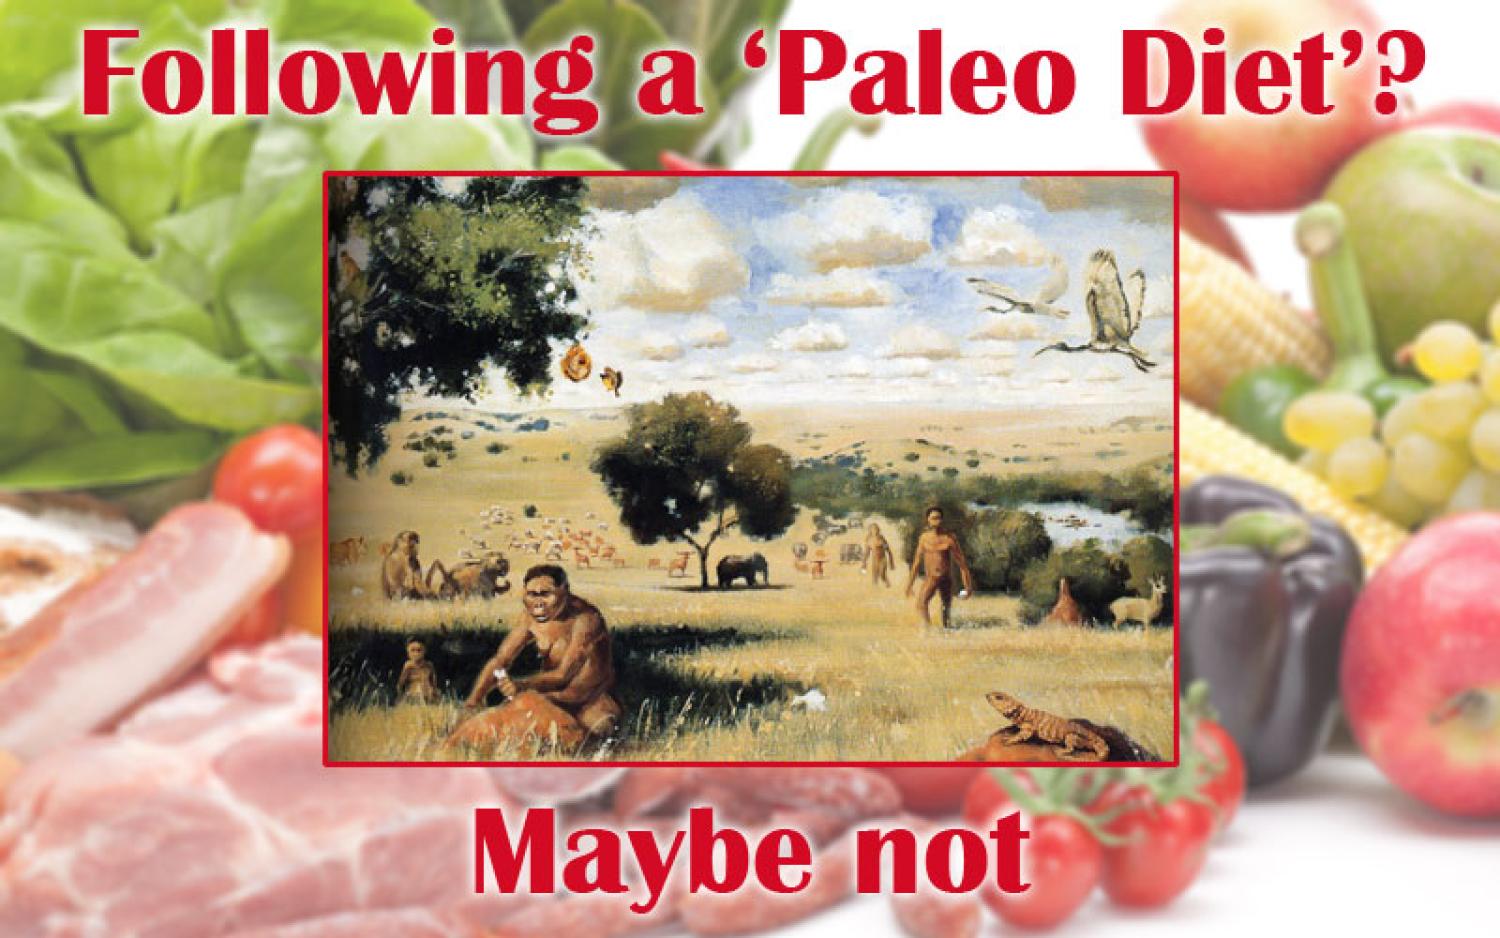 Thinking About a Paleo Diet? Evolve!